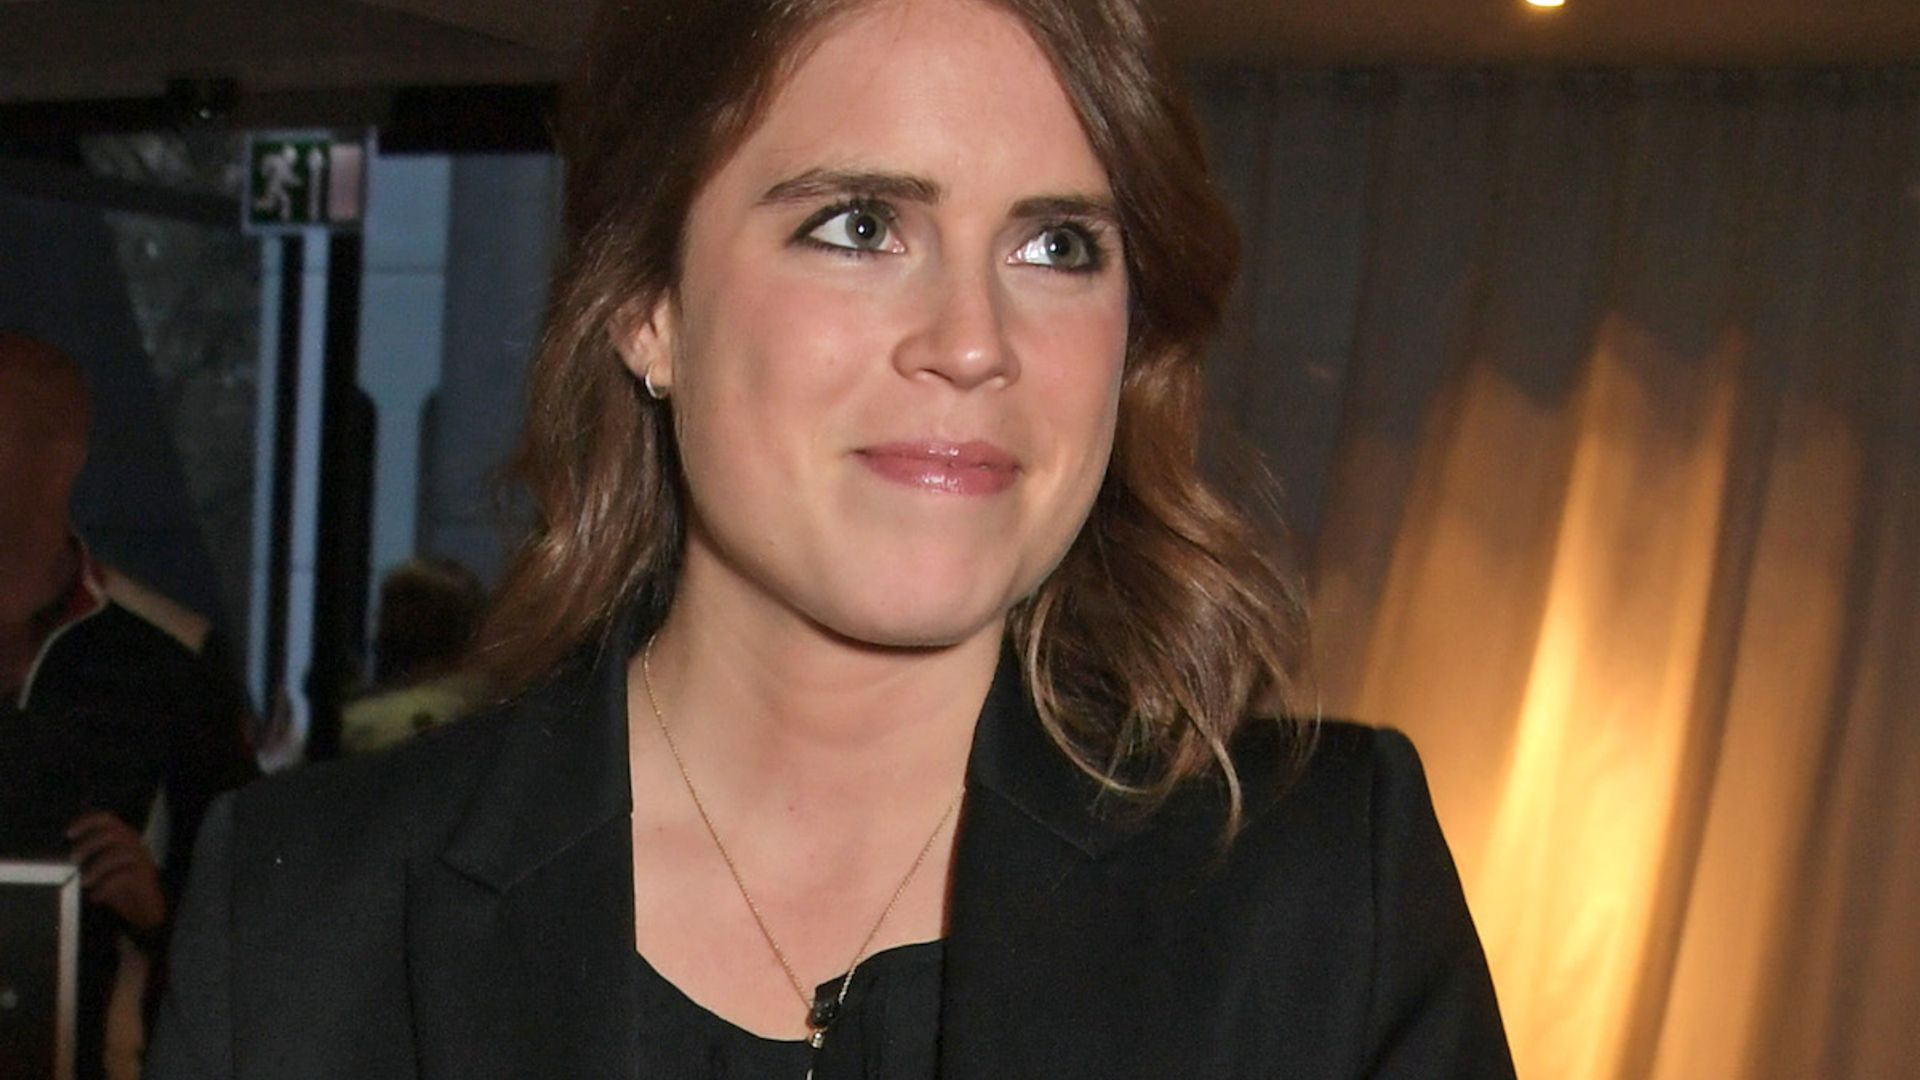 Princess Eugenie rewears her H&M maternity dress, and looks totally gorgeous